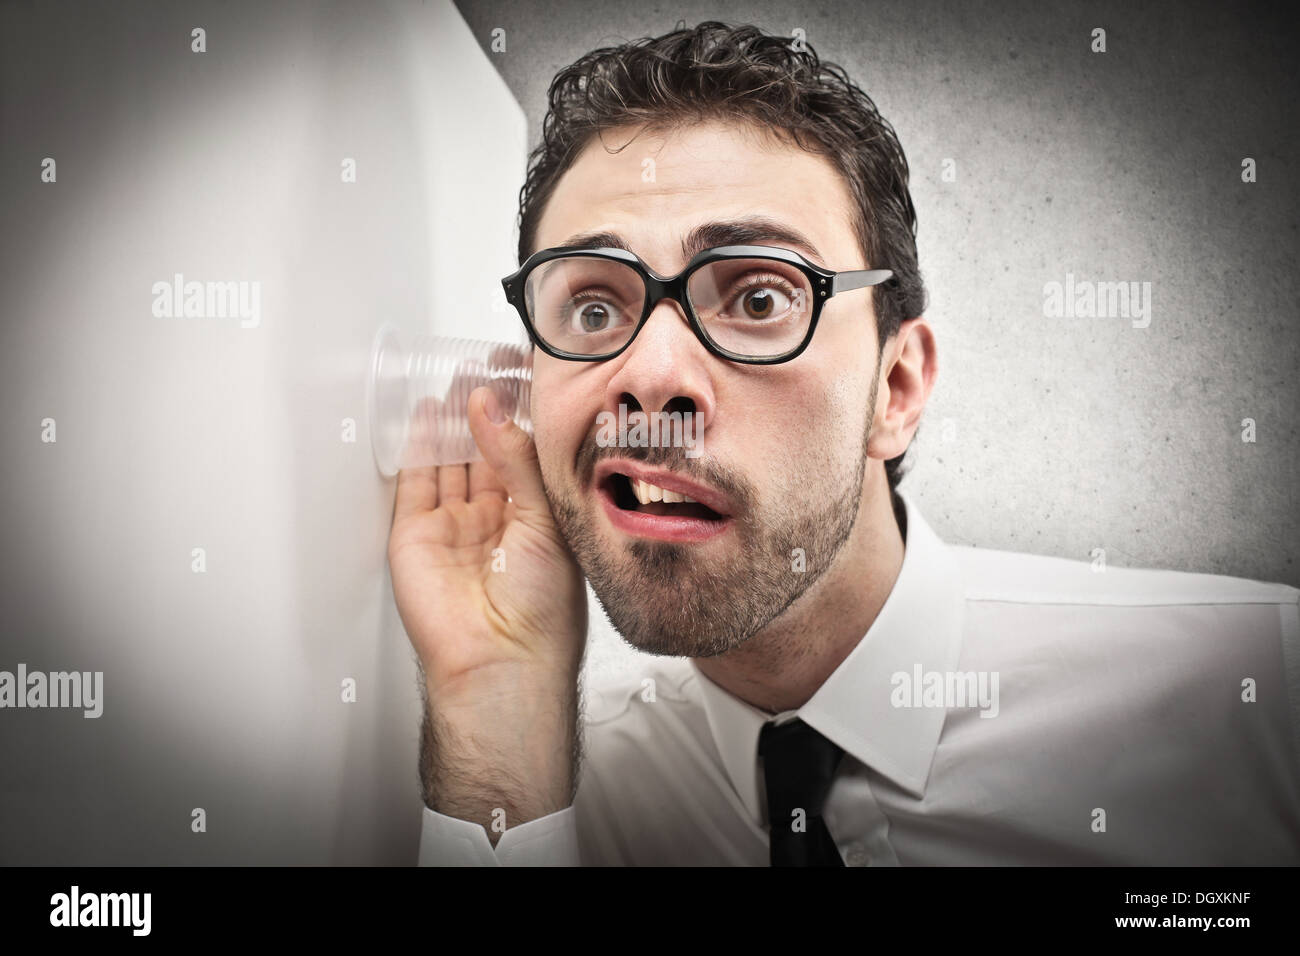 Office worker with glasses trying to hear through a wall Stock Photo